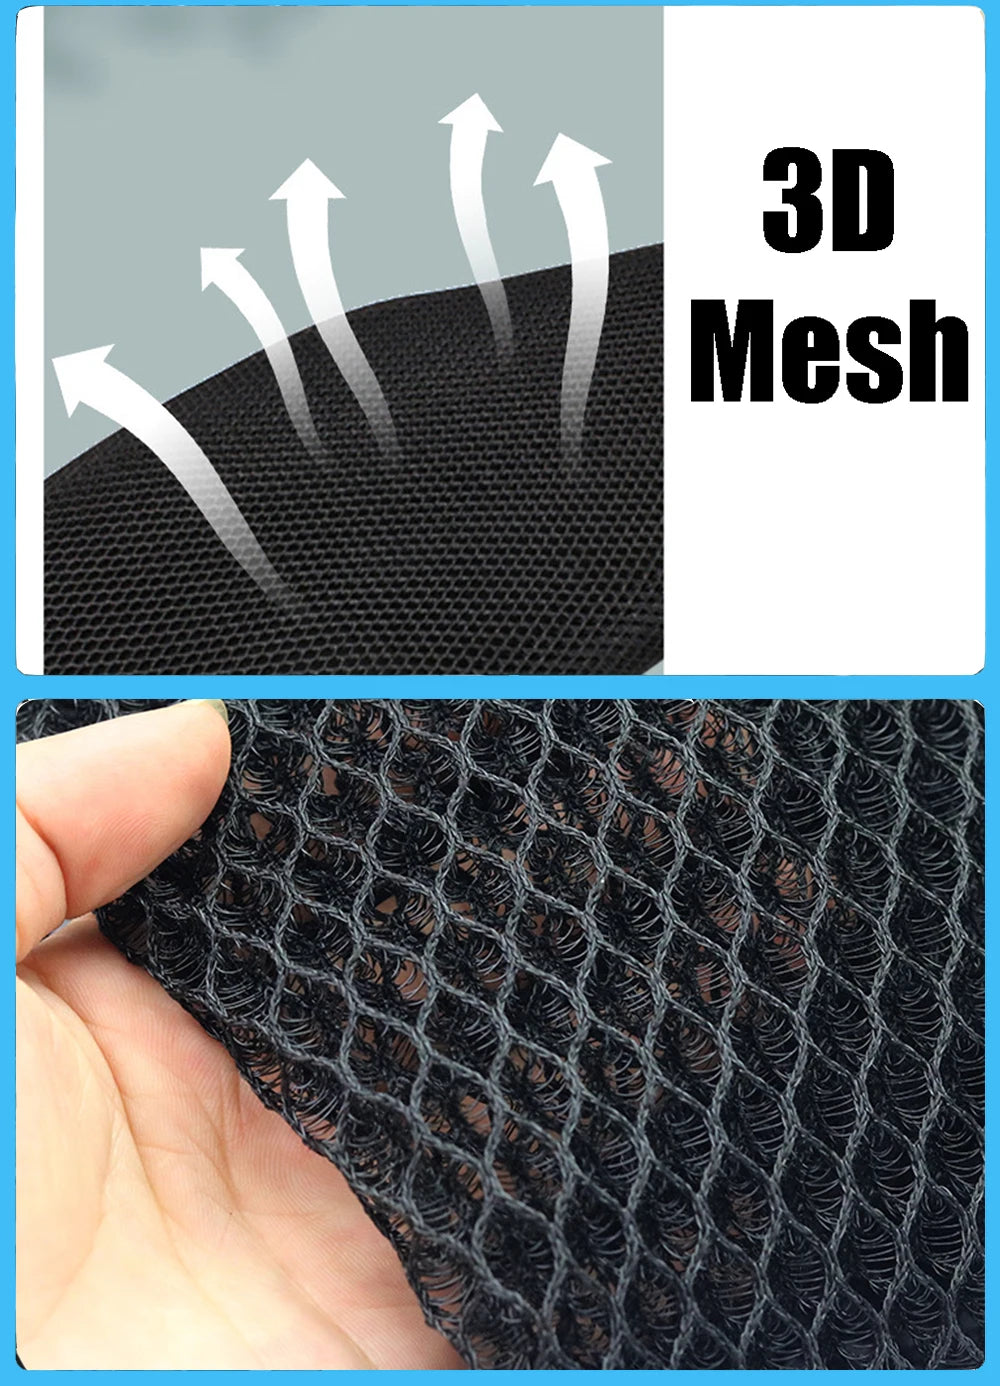 For CFMOTO CF 800MT MT800 MT 800 MT Motorcycle Accessories Mesh Breathable Seat Cover Protector Insulation Seat Cushion Cover